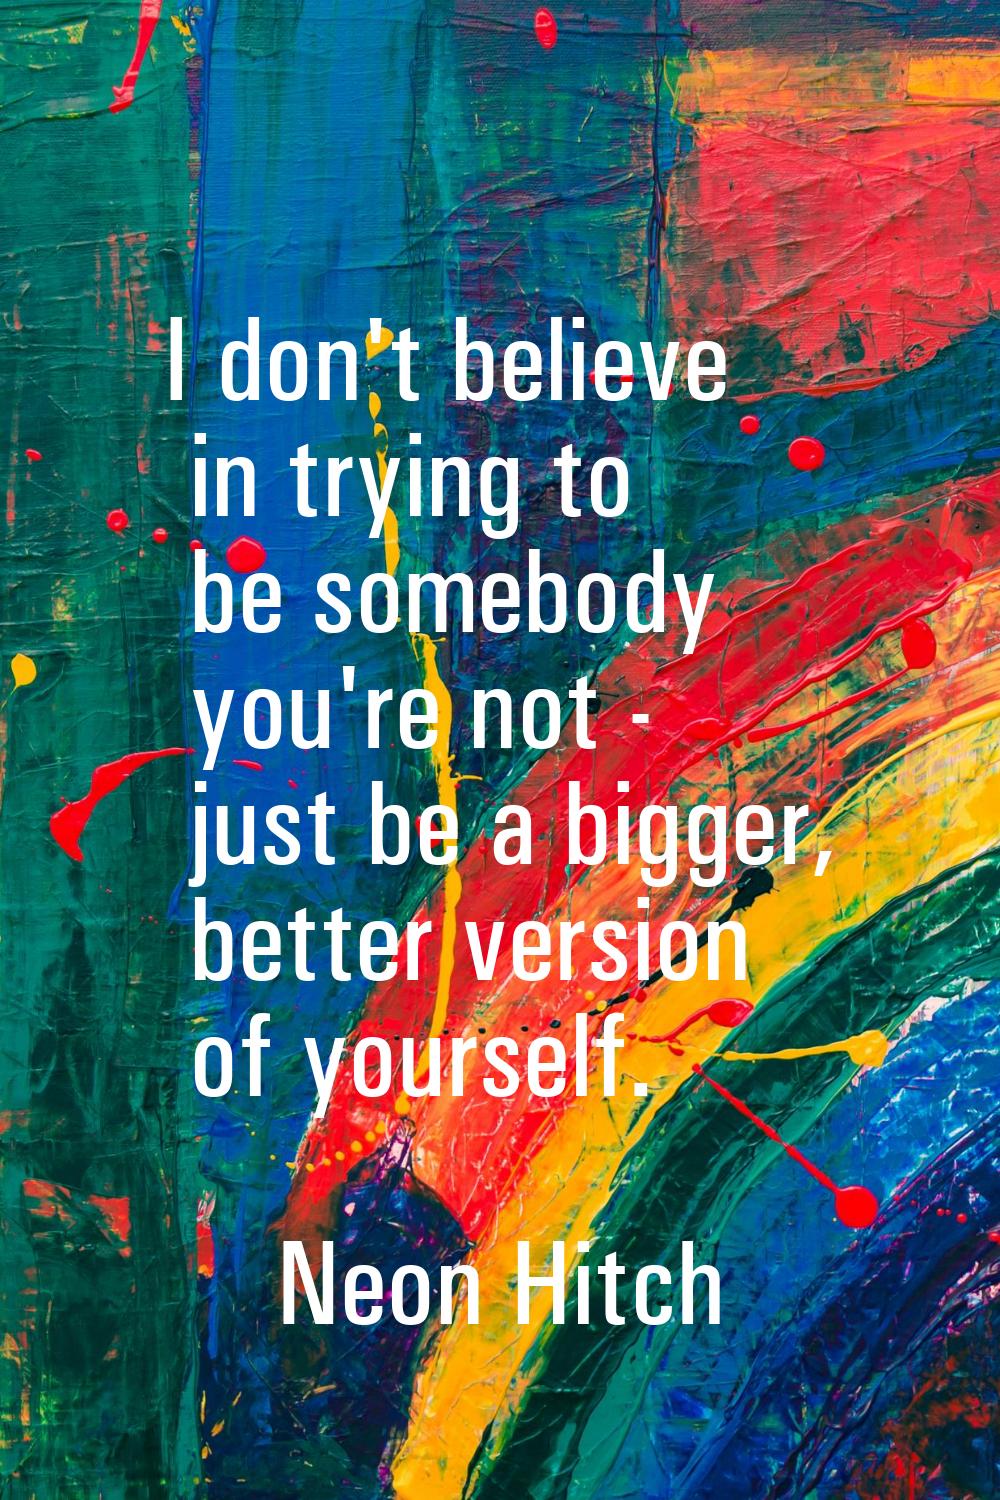 I don't believe in trying to be somebody you're not - just be a bigger, better version of yourself.